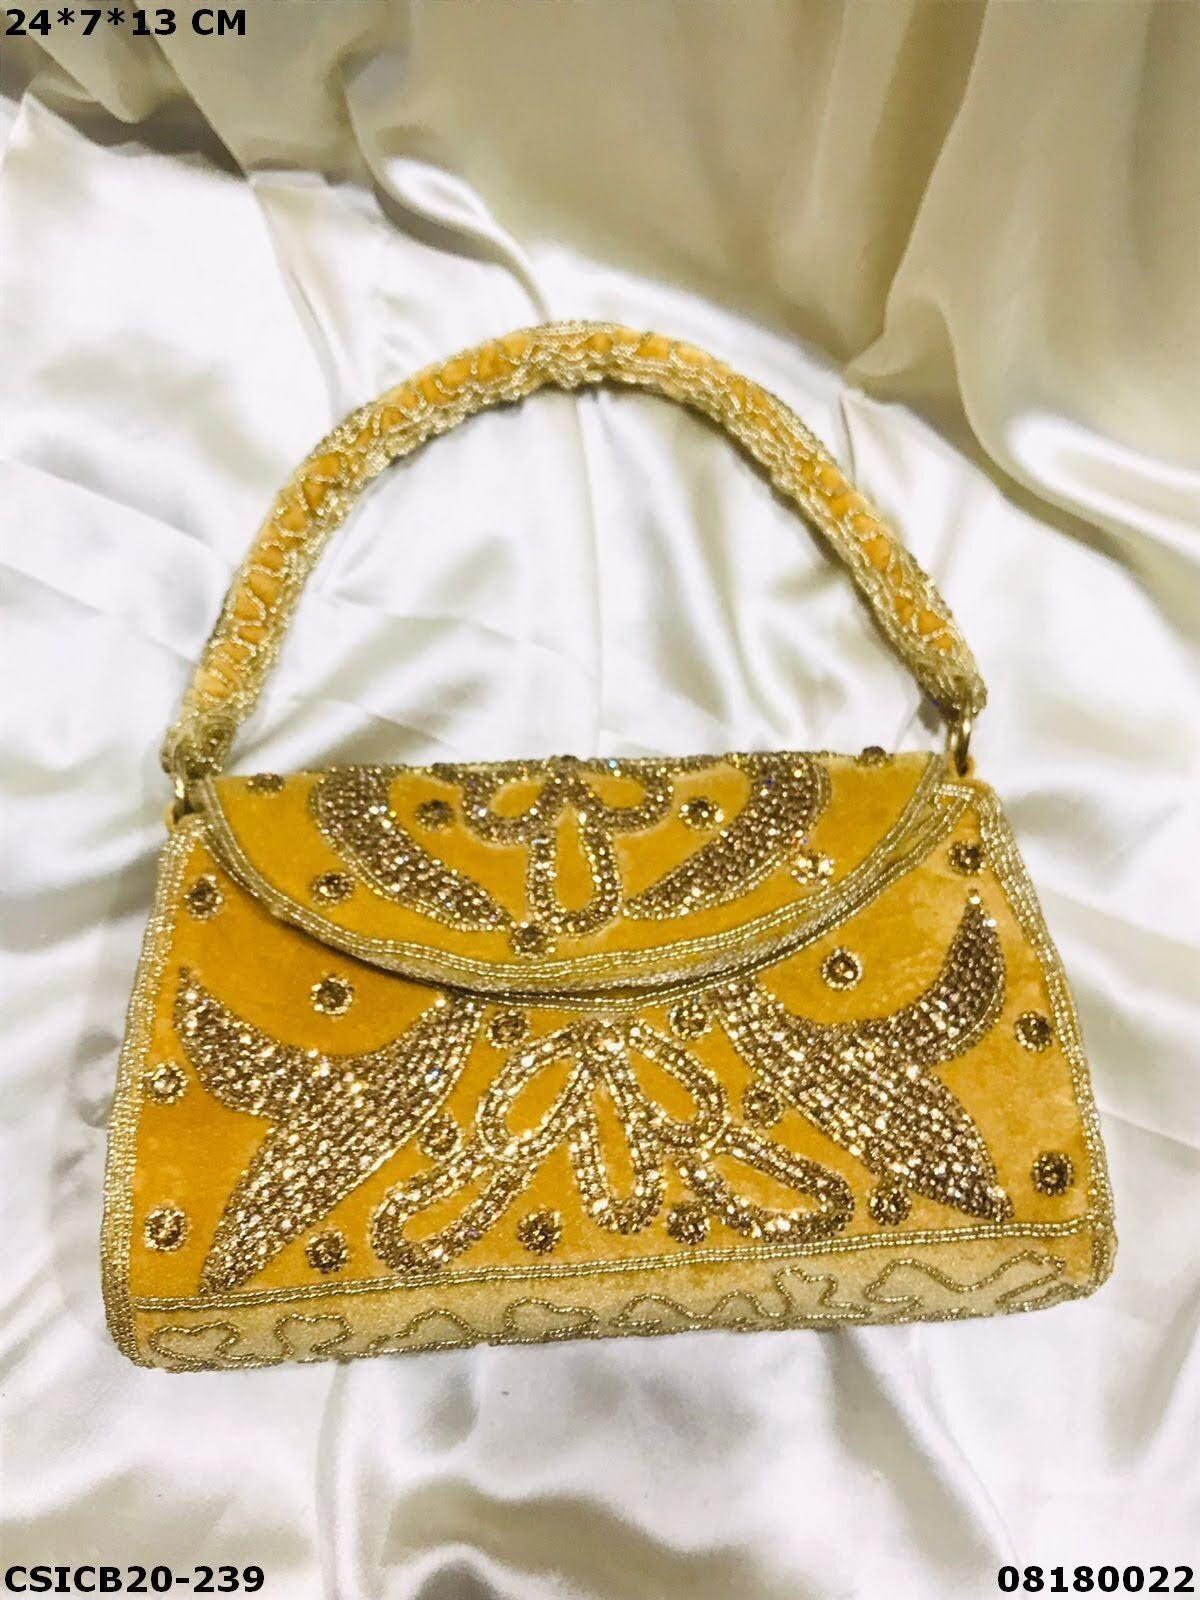 Handcrafted Indian Wedding golden Clutch For Ethnic bridal look party bag |  eBay